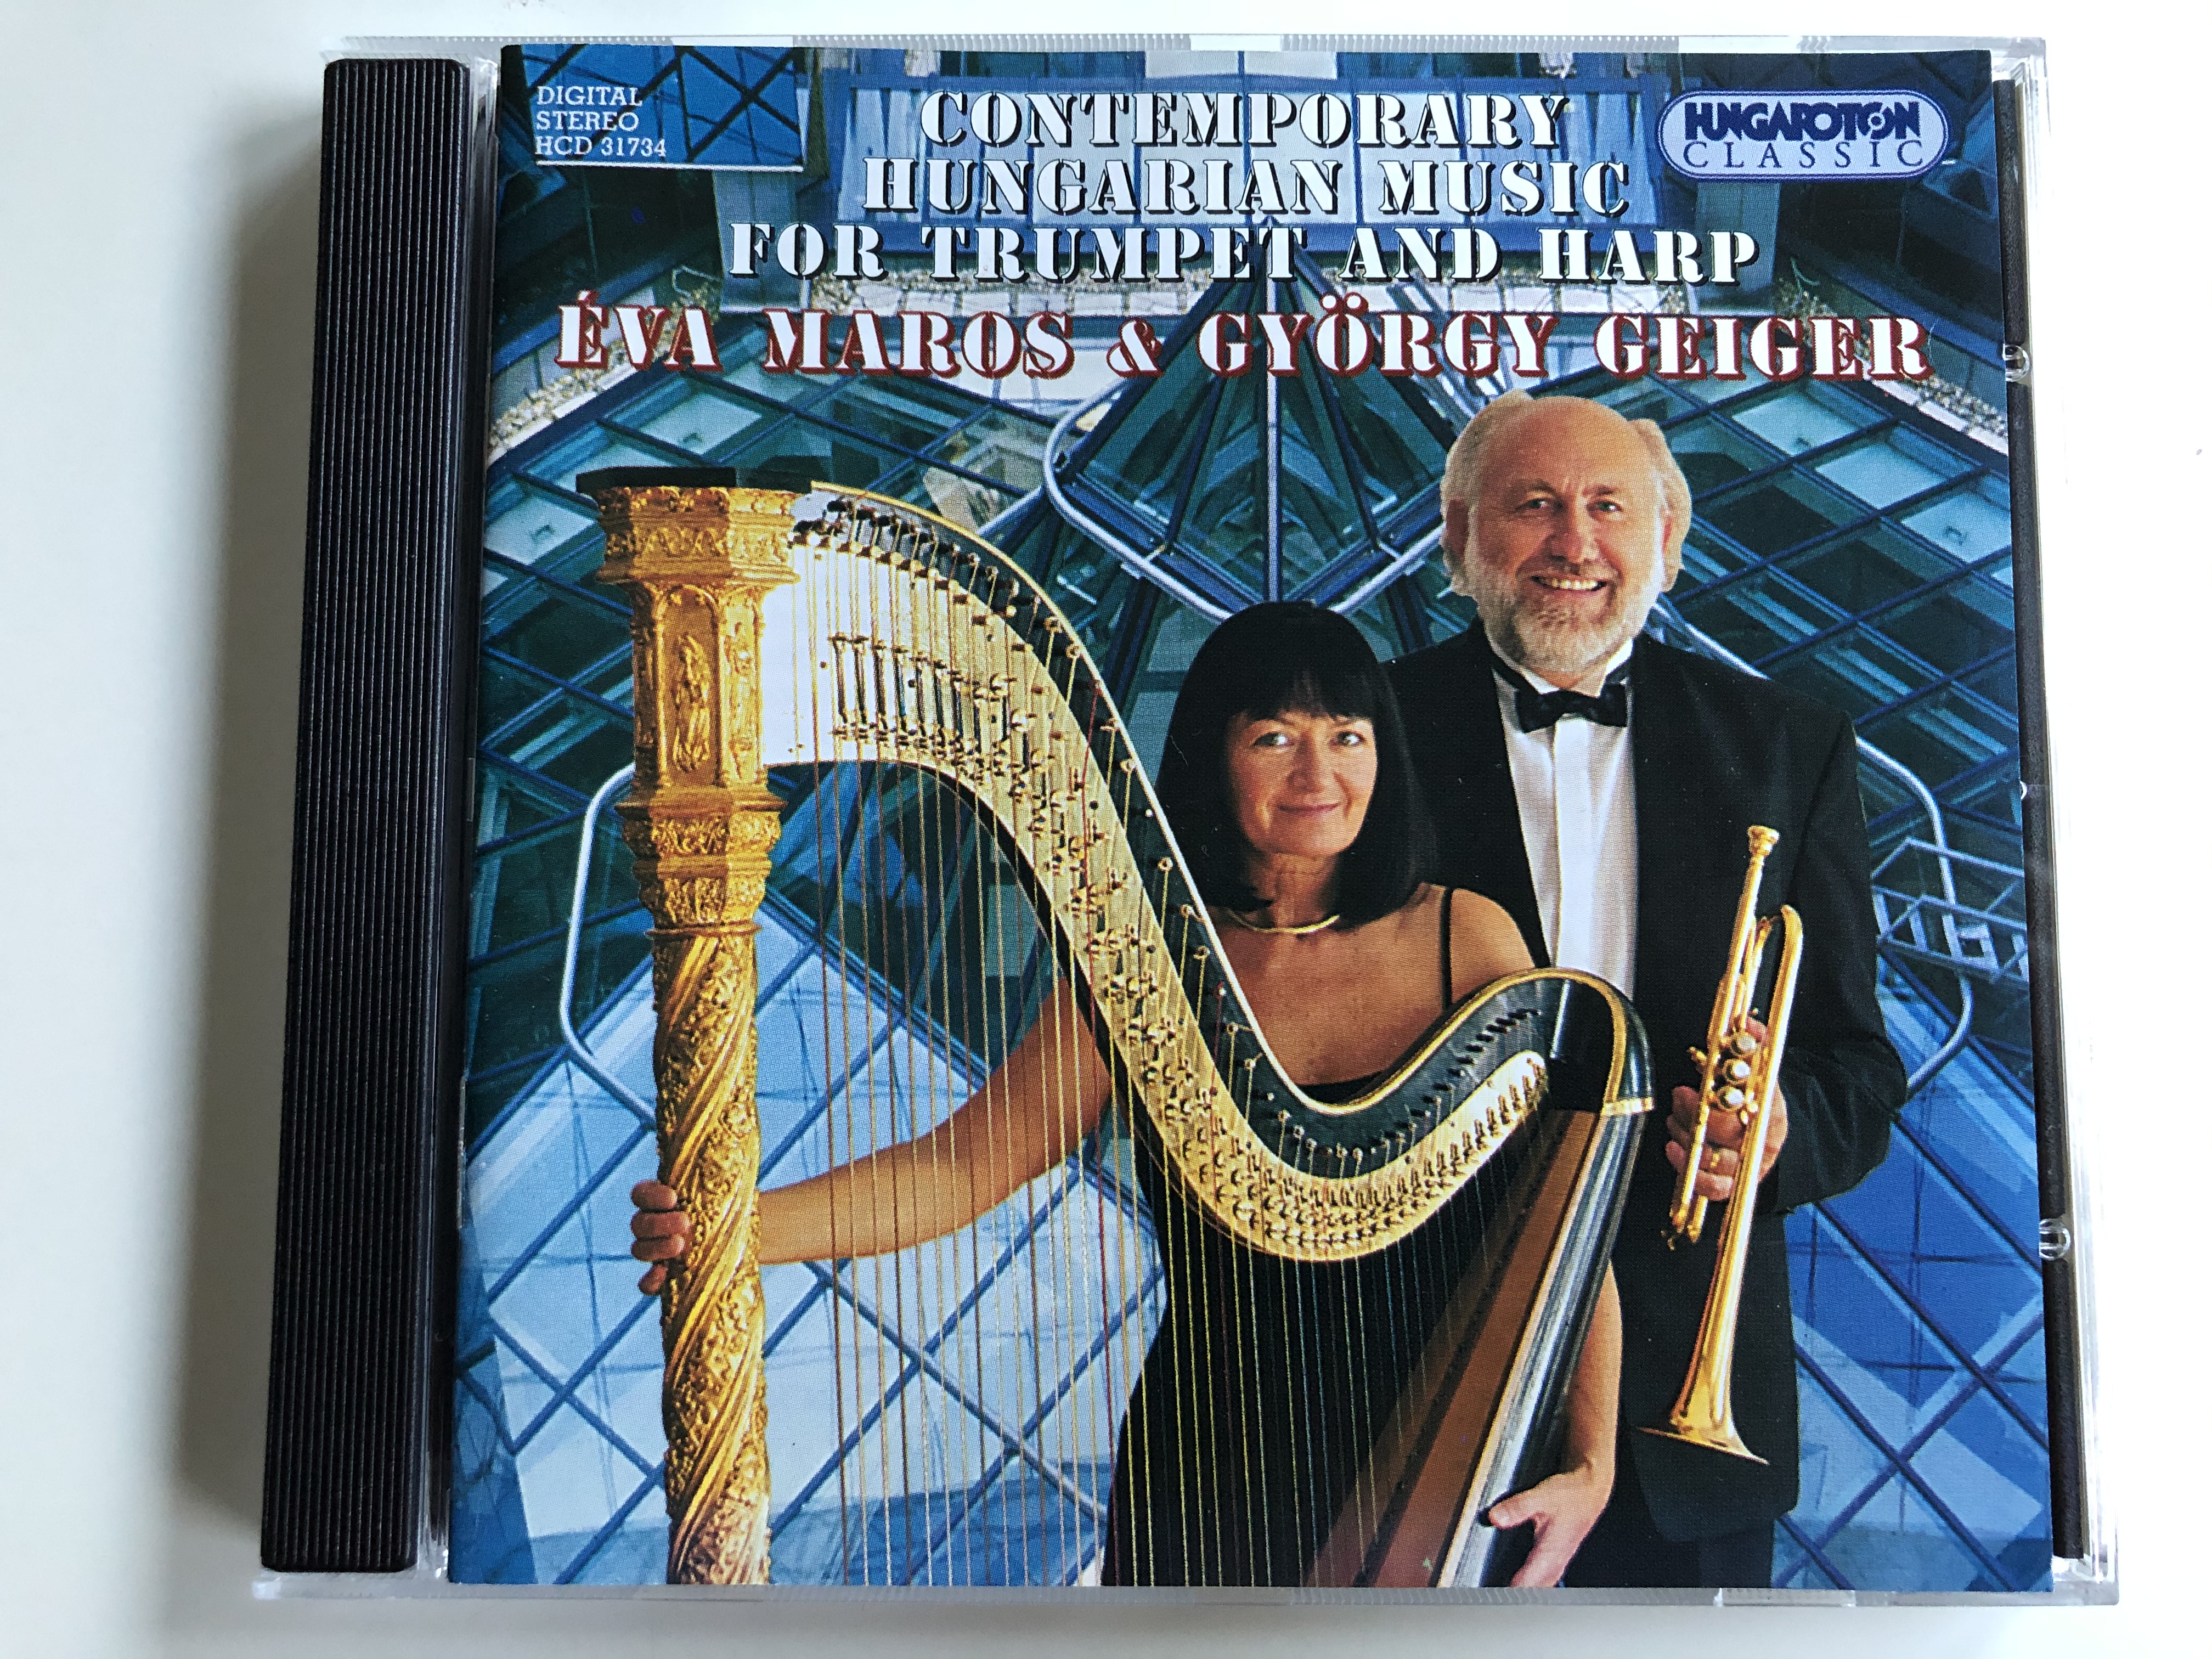 contemporary-hungarian-music-for-trumpet-and-harp-va-maros-gy-rgy-geiger-hungaroton-classic-audio-cd-1995-1997-stereo-hcd-31734-1-.jpg